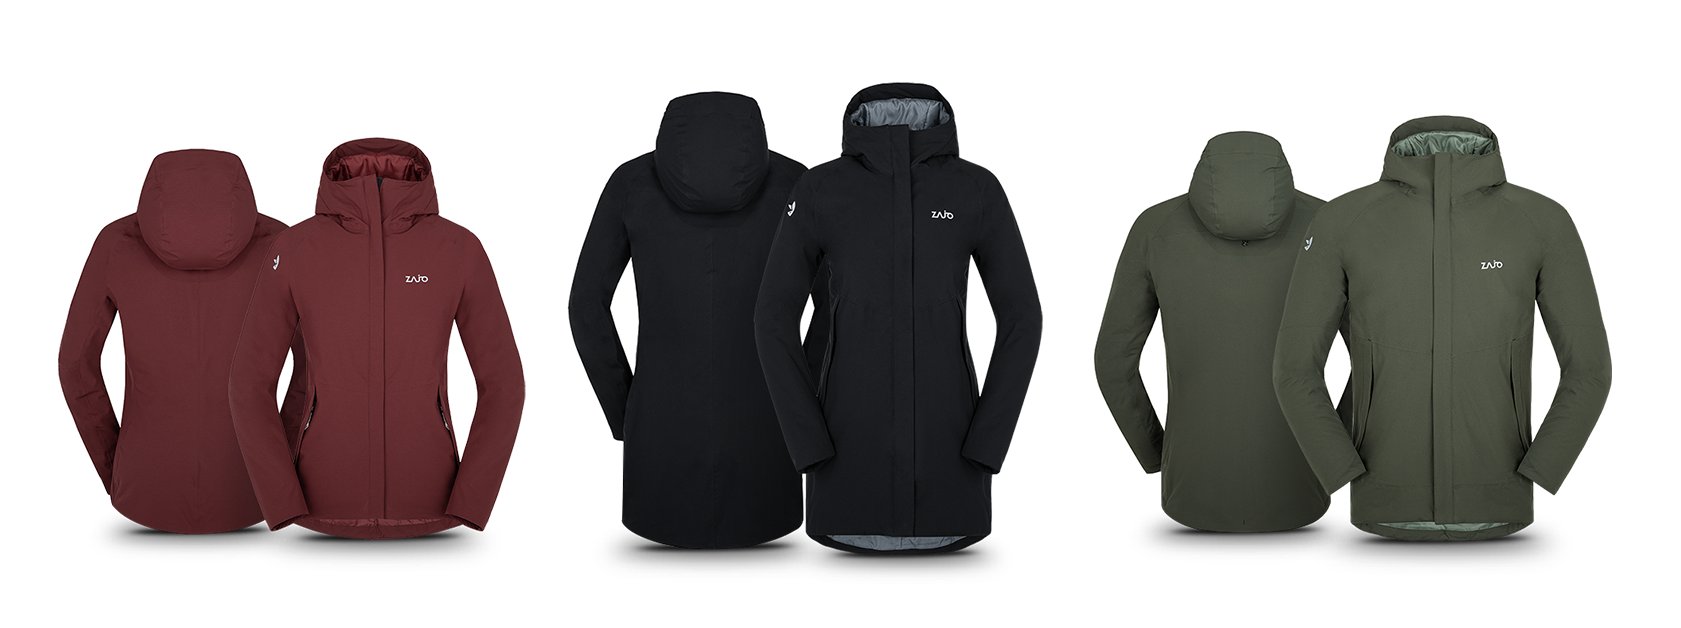 Introducing the Gosau family of jackets, including our first women's parka!